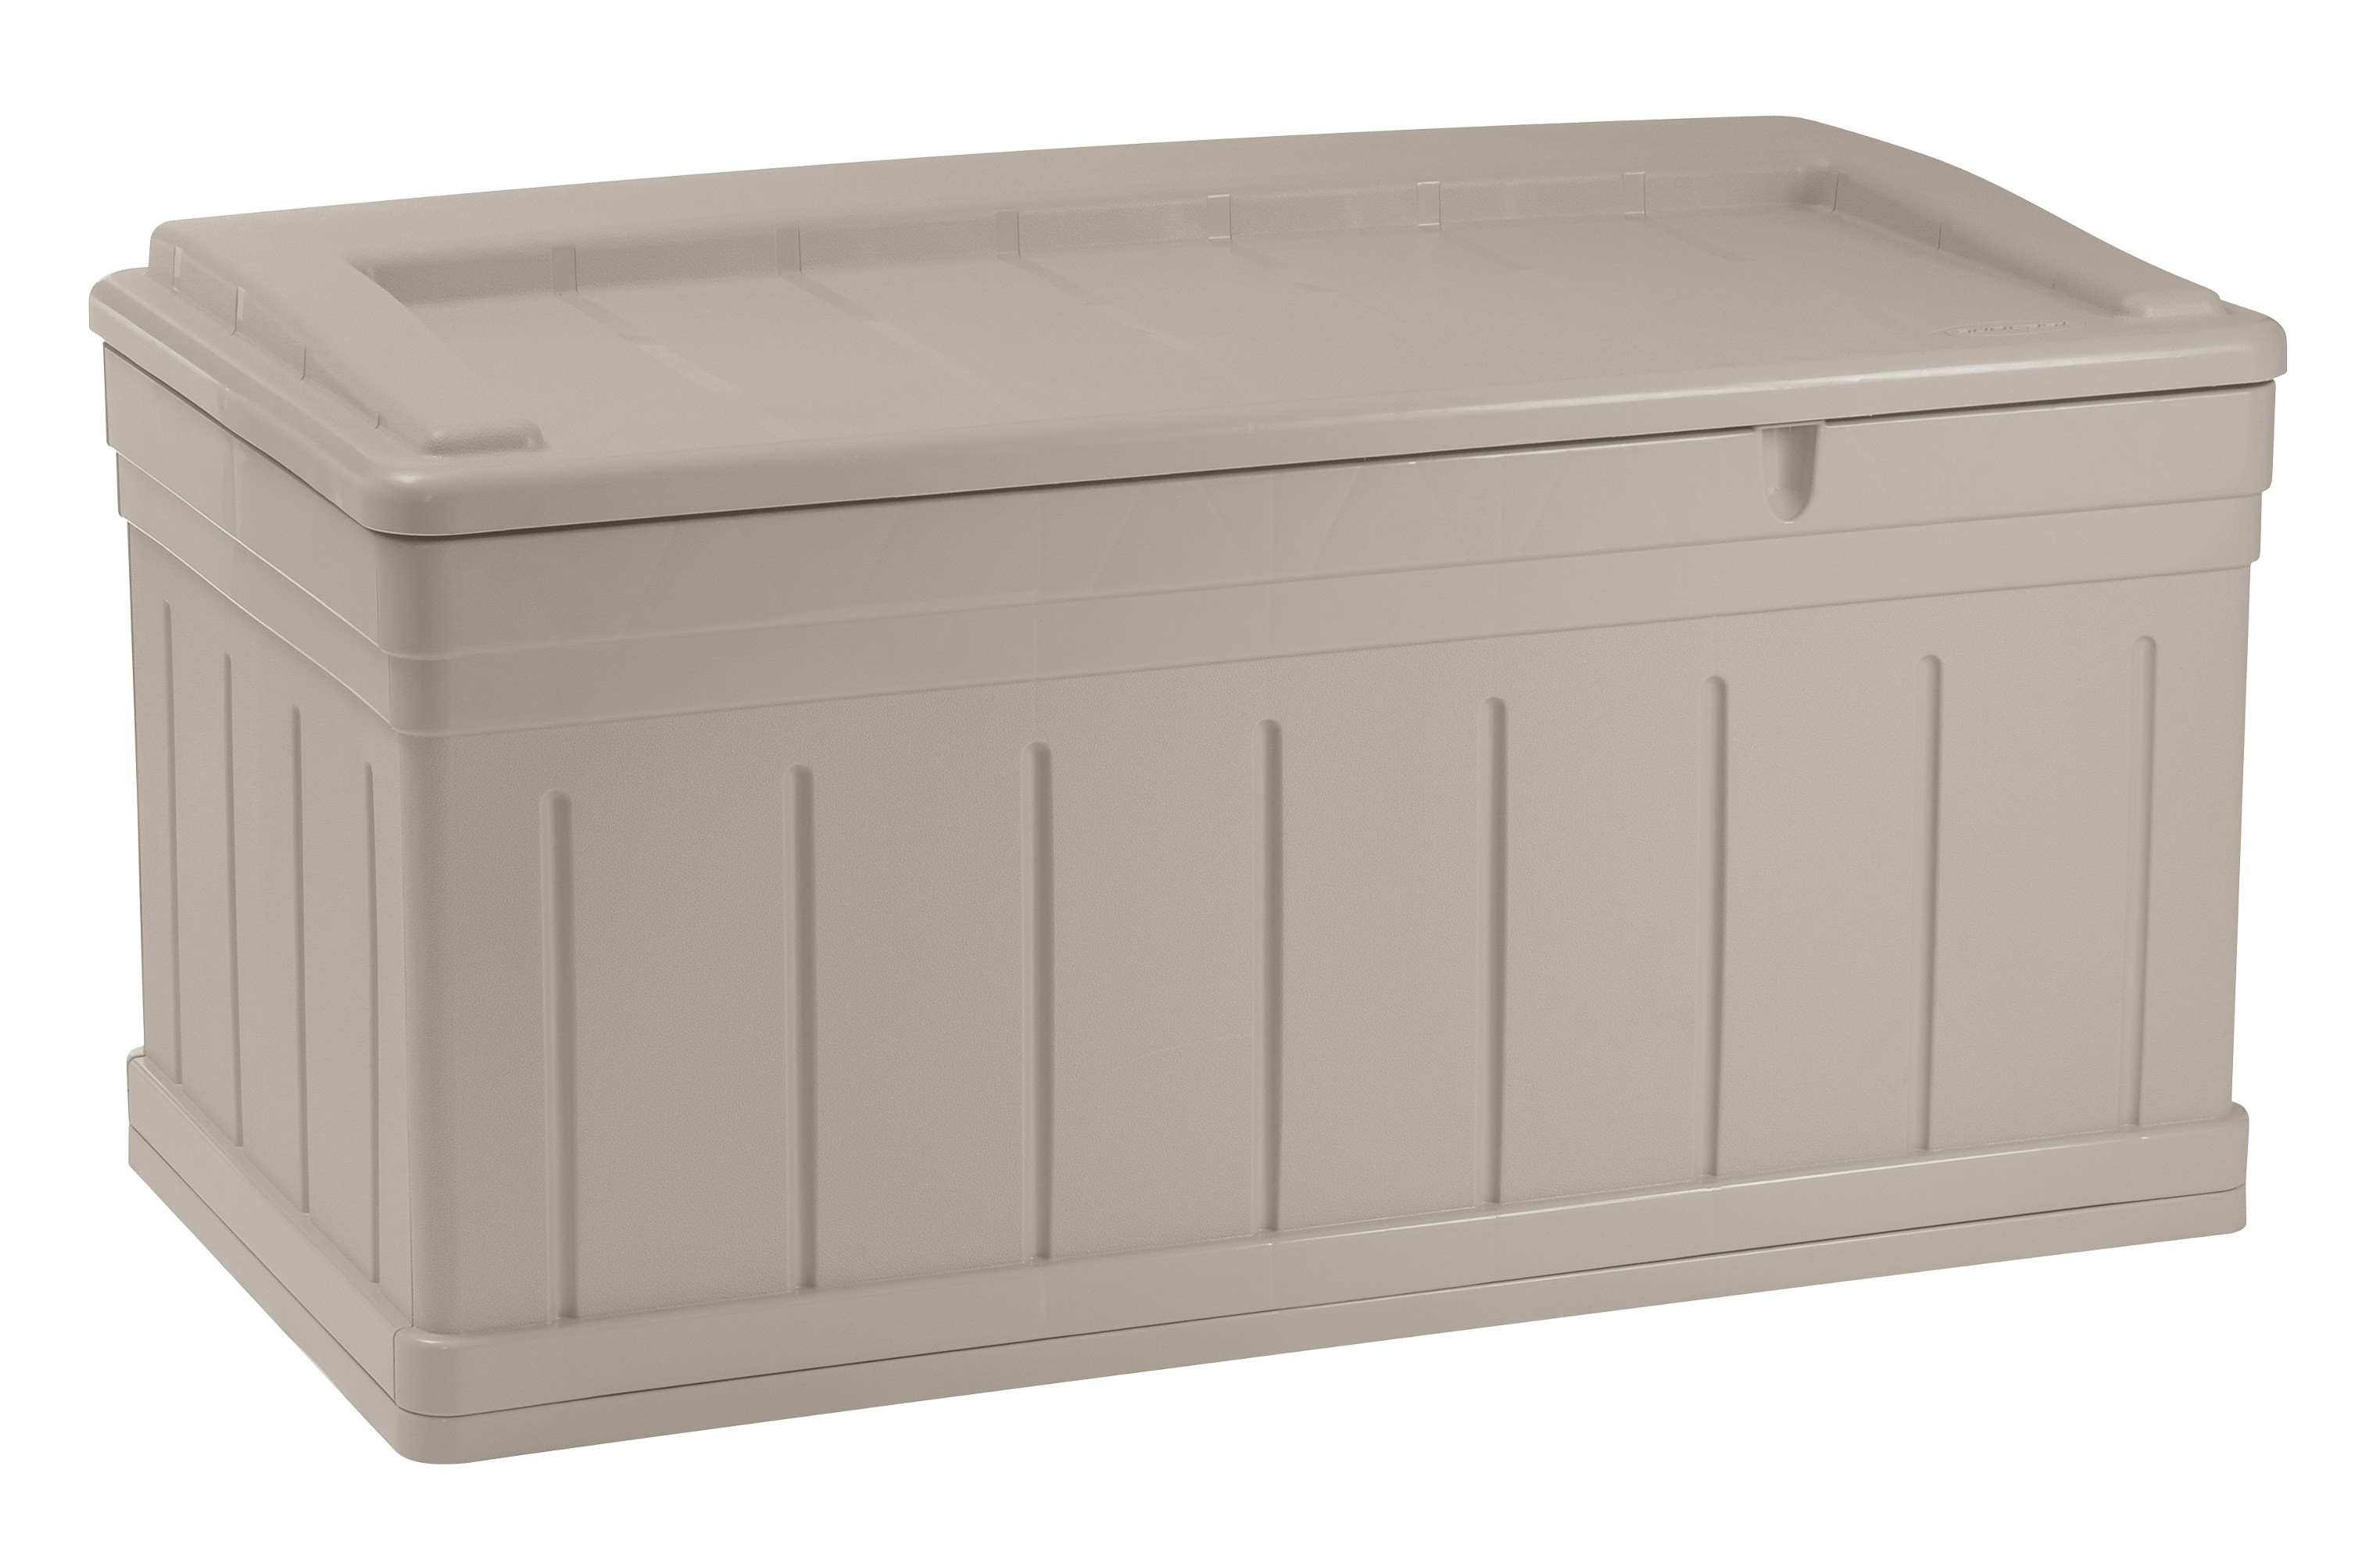 Suncast Horizontal 129 Gallon Stay Dry Outdoor Deck Storage Box Resin with Seat, Taupe, 10.1 in D x 10.1 in H x 10.1 in W, 47 lb - image 1 of 6